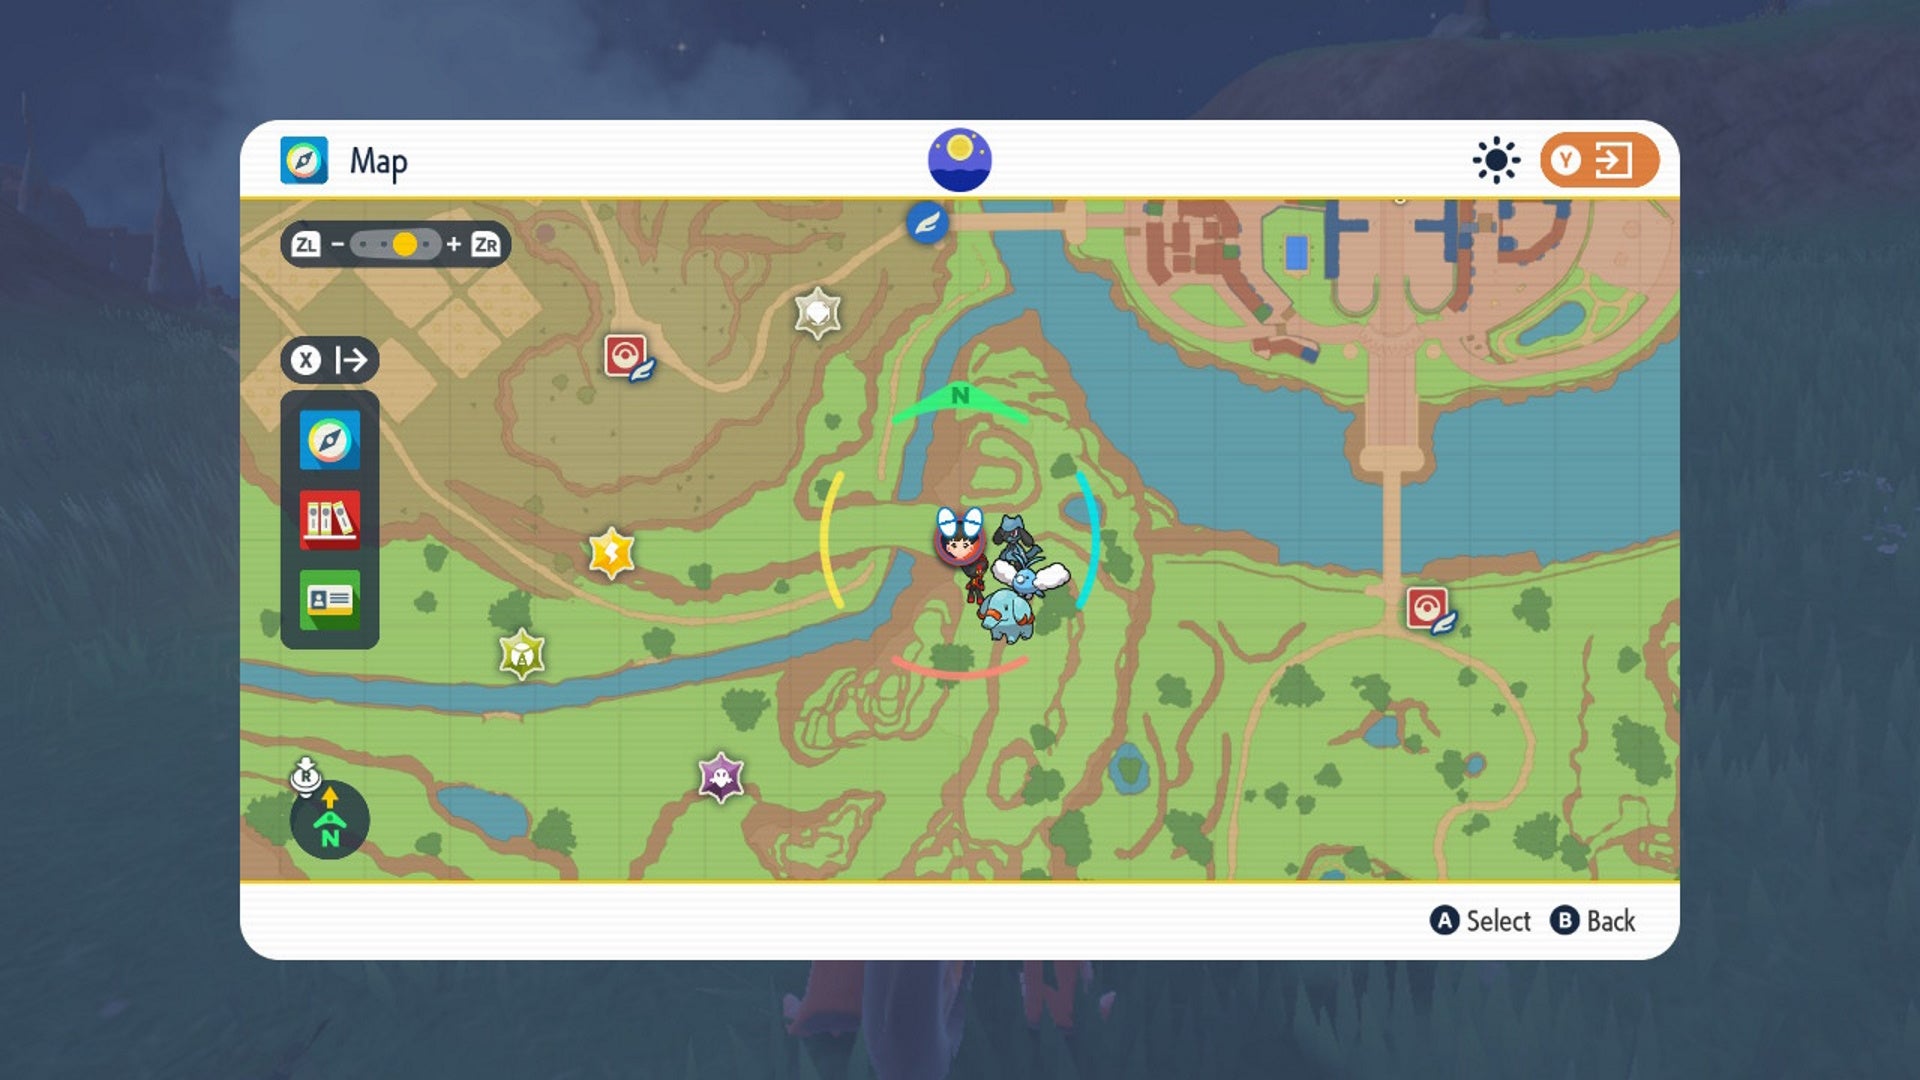 How to get Riolu in Scarlet and Violet: A map image shows a player character standing on the edge of a river near an open plain